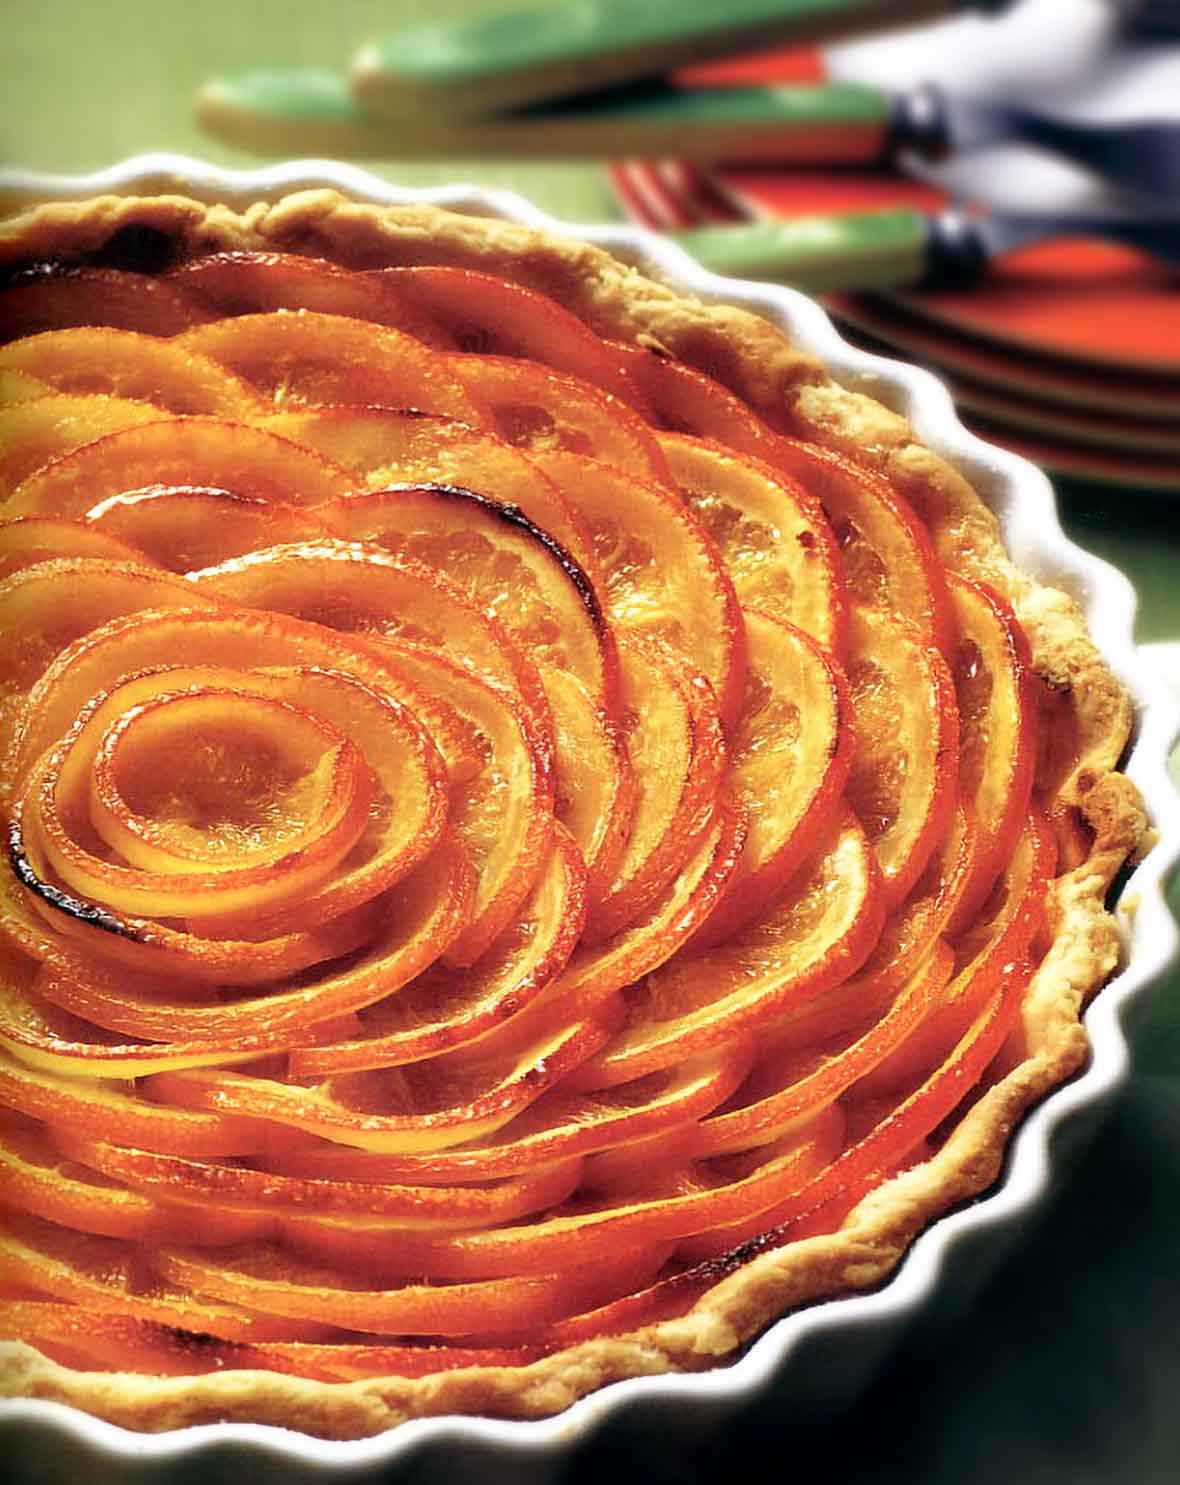 A Valencian orange tart with slices of oranges in a circular pattern in a pastry crust